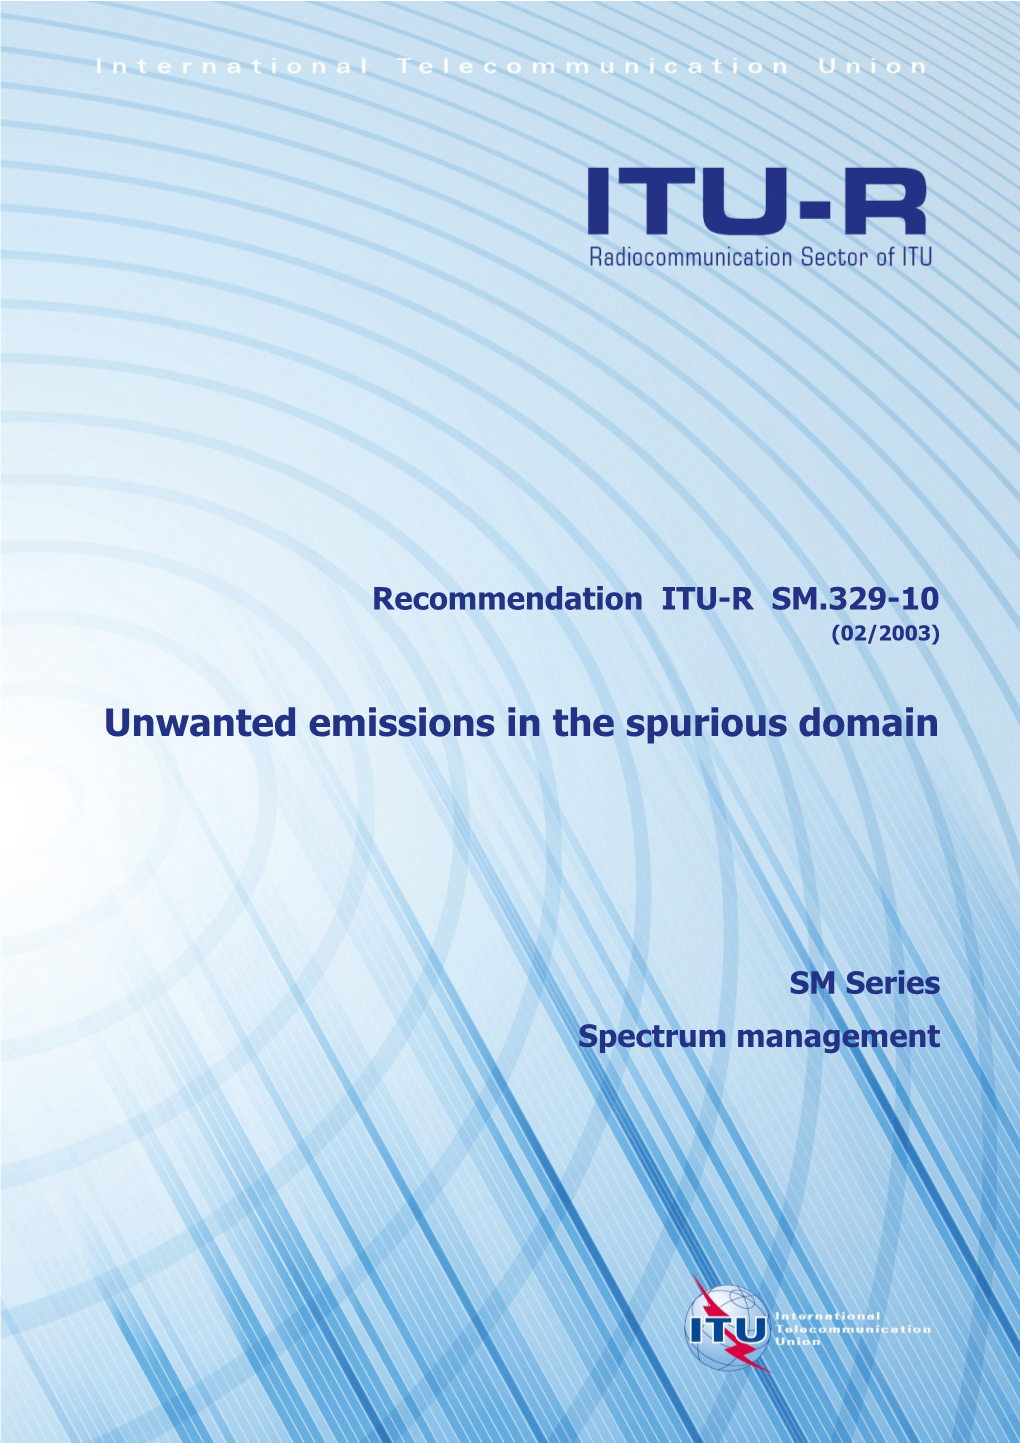 RECOMMENDATION ITU-R SM.329-10 - Unwanted Emissions in the Spurious Domain*